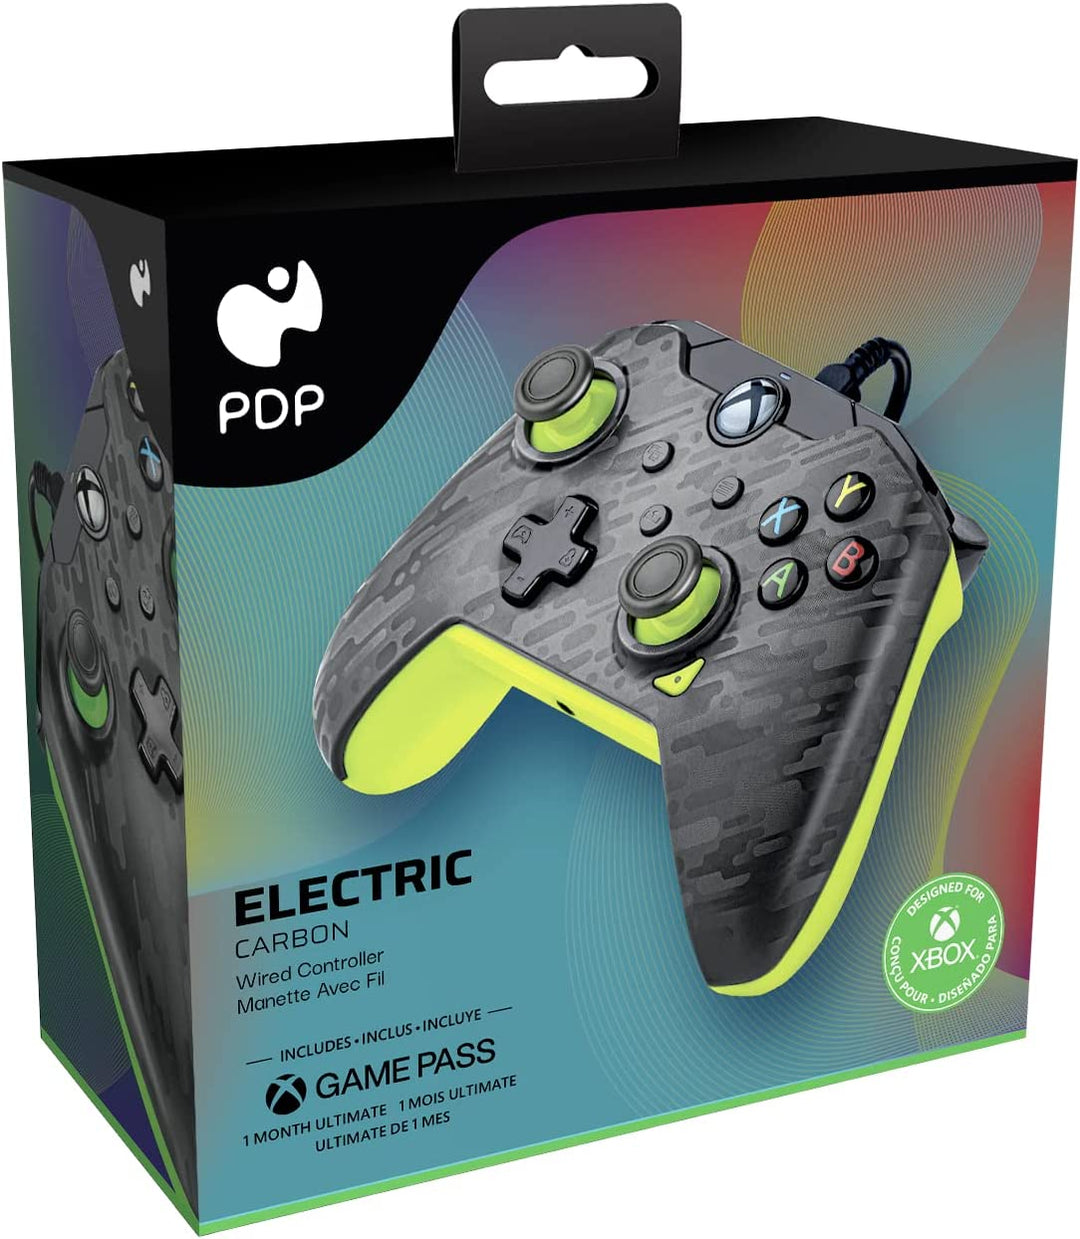 PDP Wired Controller Electric Carbon for Xbox Series X|S, Gamepad, Wired Video G